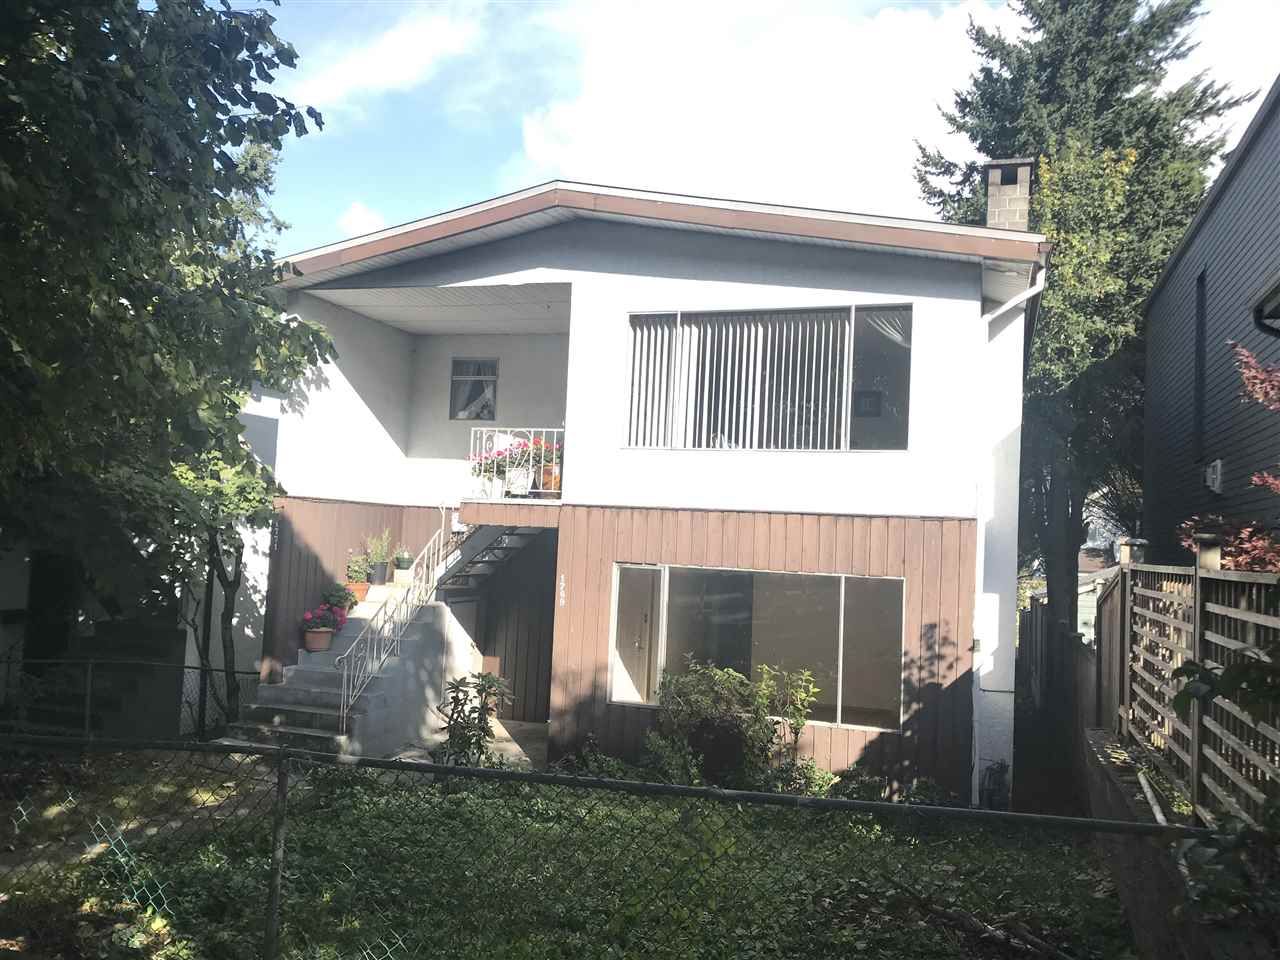 Main Photo: 1769 E 8TH Avenue in Vancouver: Grandview Woodland House for sale (Vancouver East)  : MLS®# R2468441